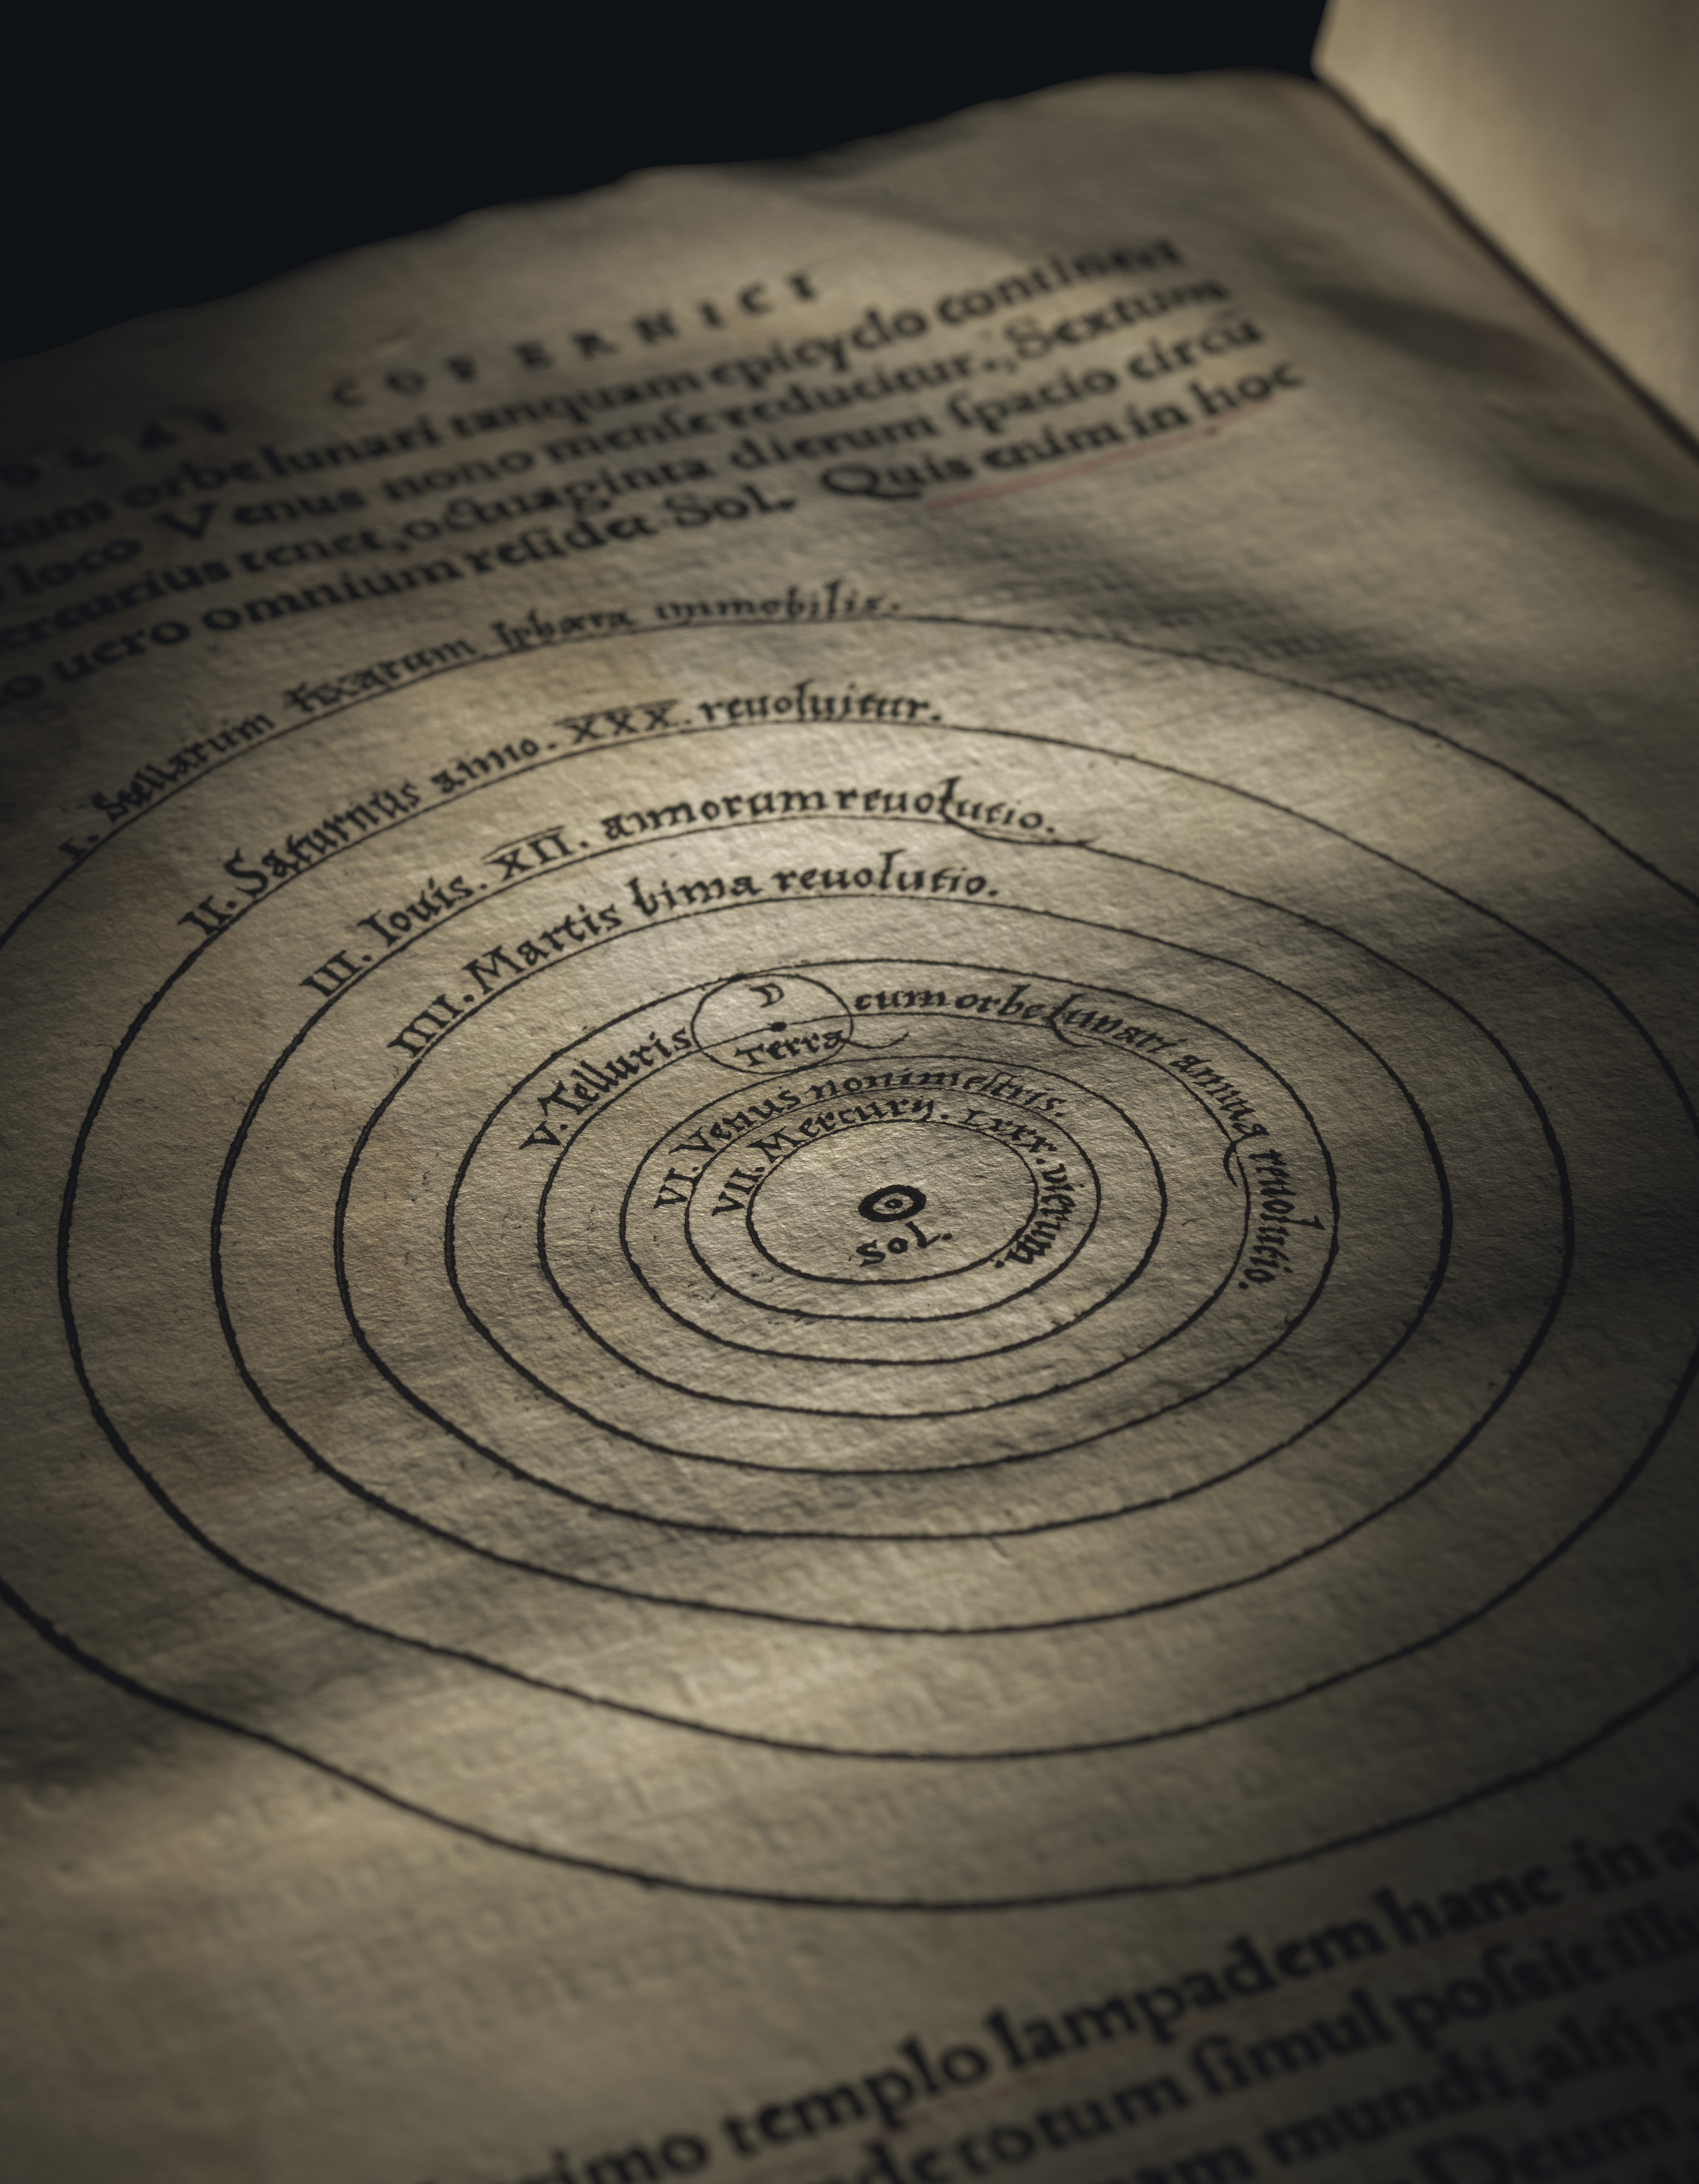 The 1543 Copernicus, open to the page showing the woodcut illustration that places the sun at the center of everything, rather than the earth.